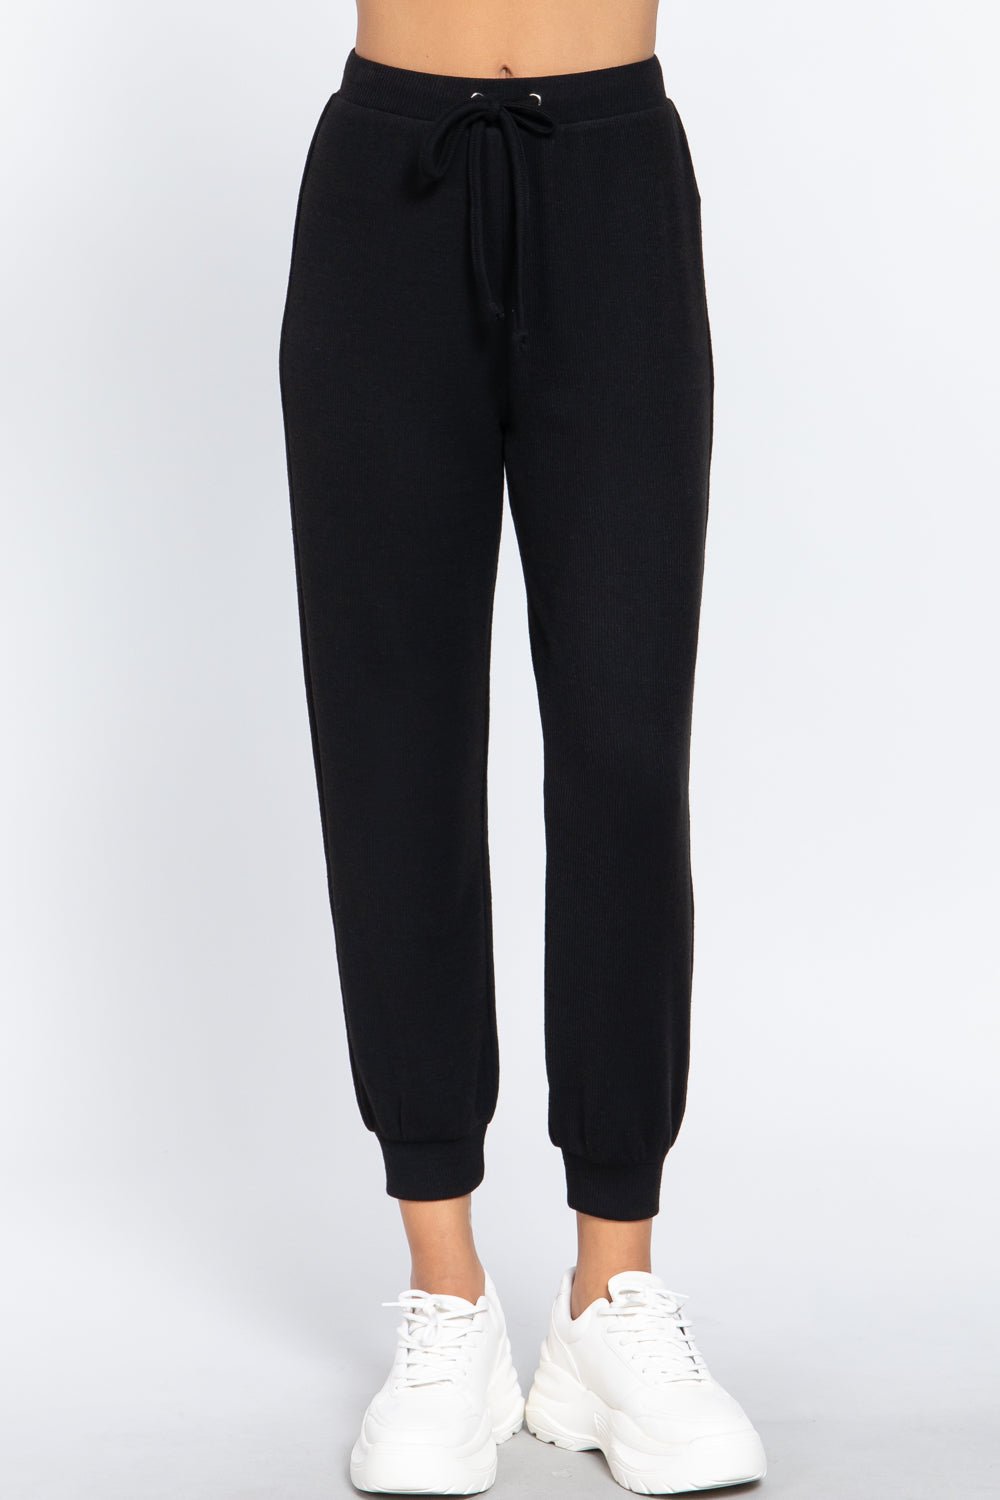 Our Best Polyester/Spandex Waist String Detail Hacci Long Pants (Black)